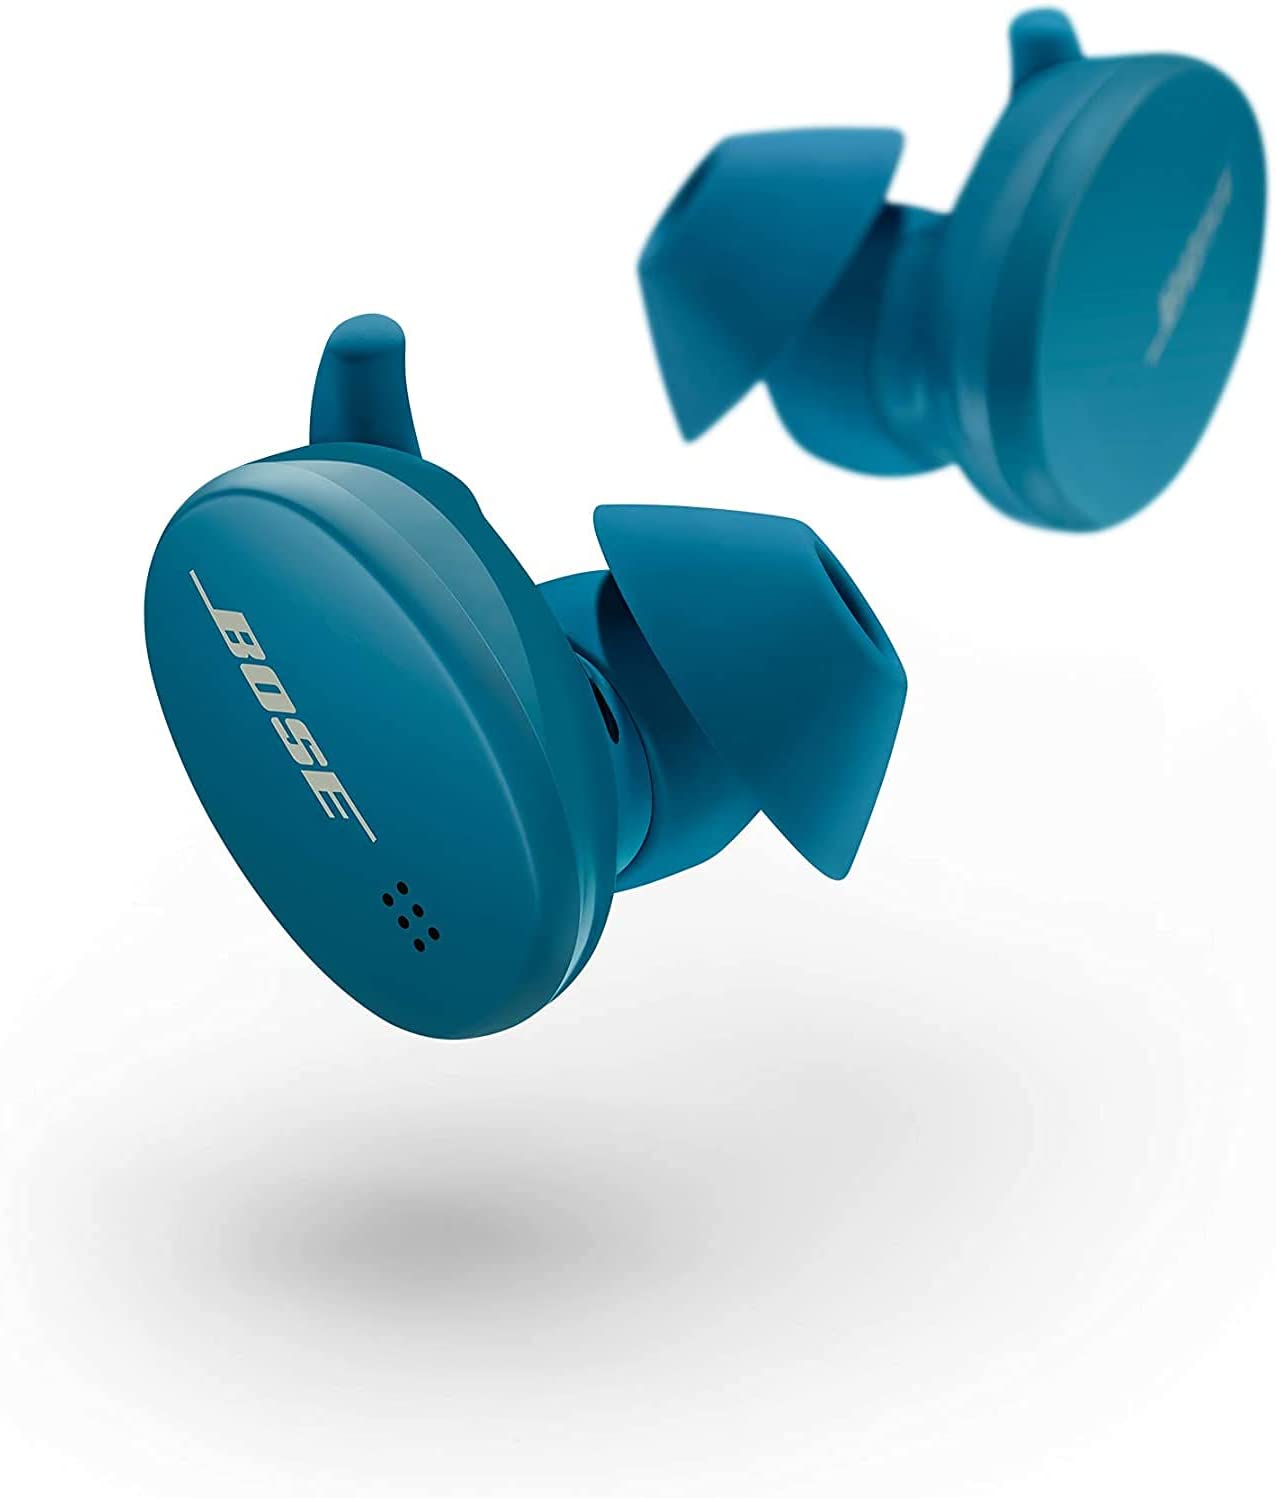 Bose Sport Bluetooth Wireless Earbuds With Microphone Blue